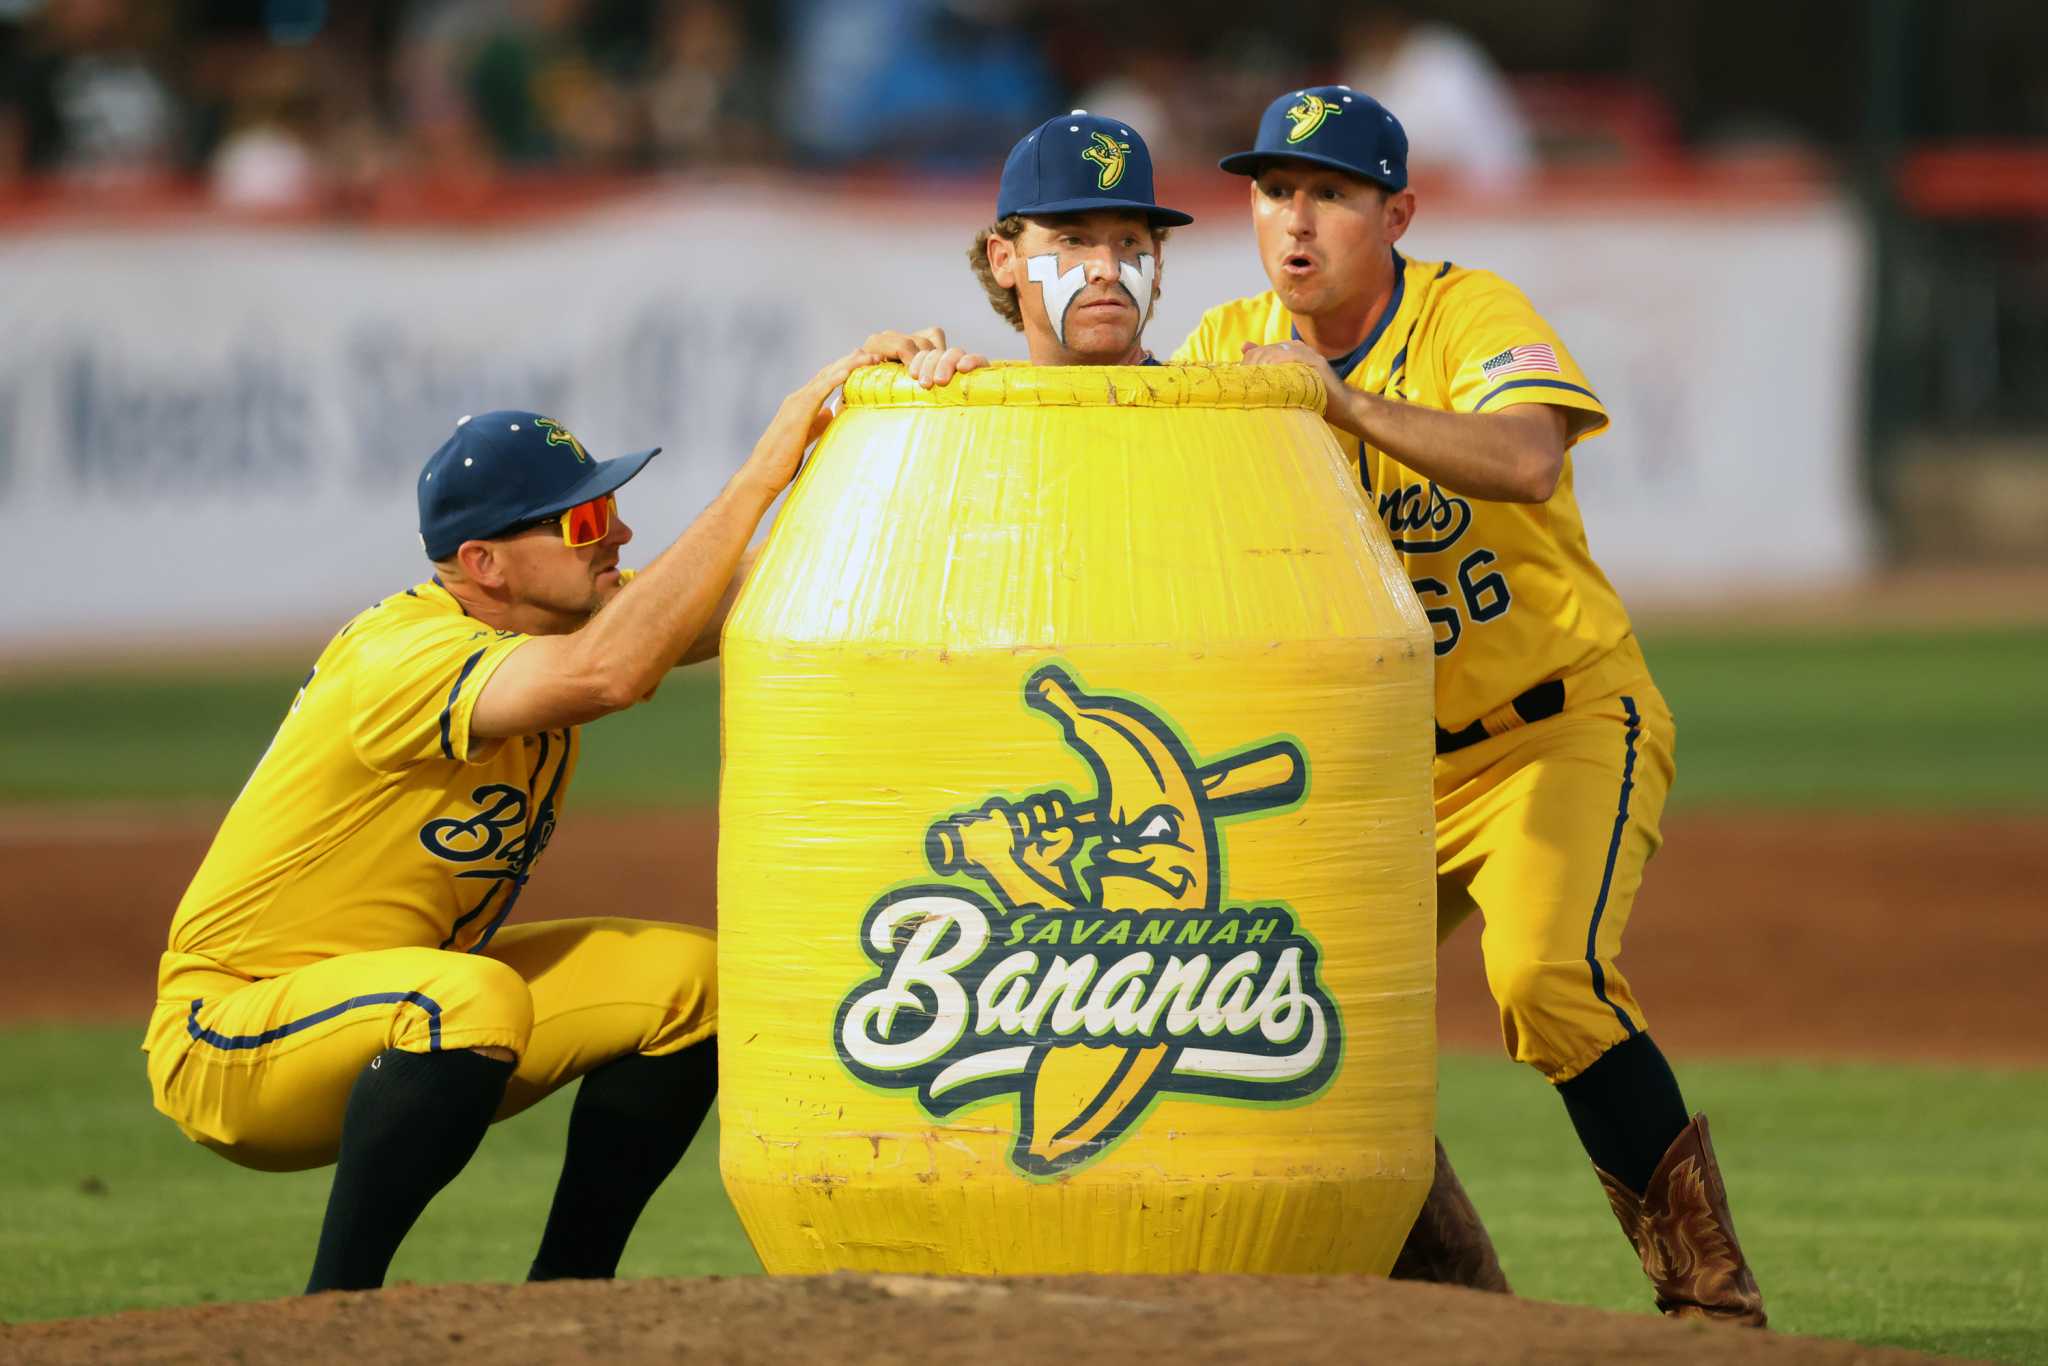 Savannah Bananas take over San Jose with lead role for Oakland’s own